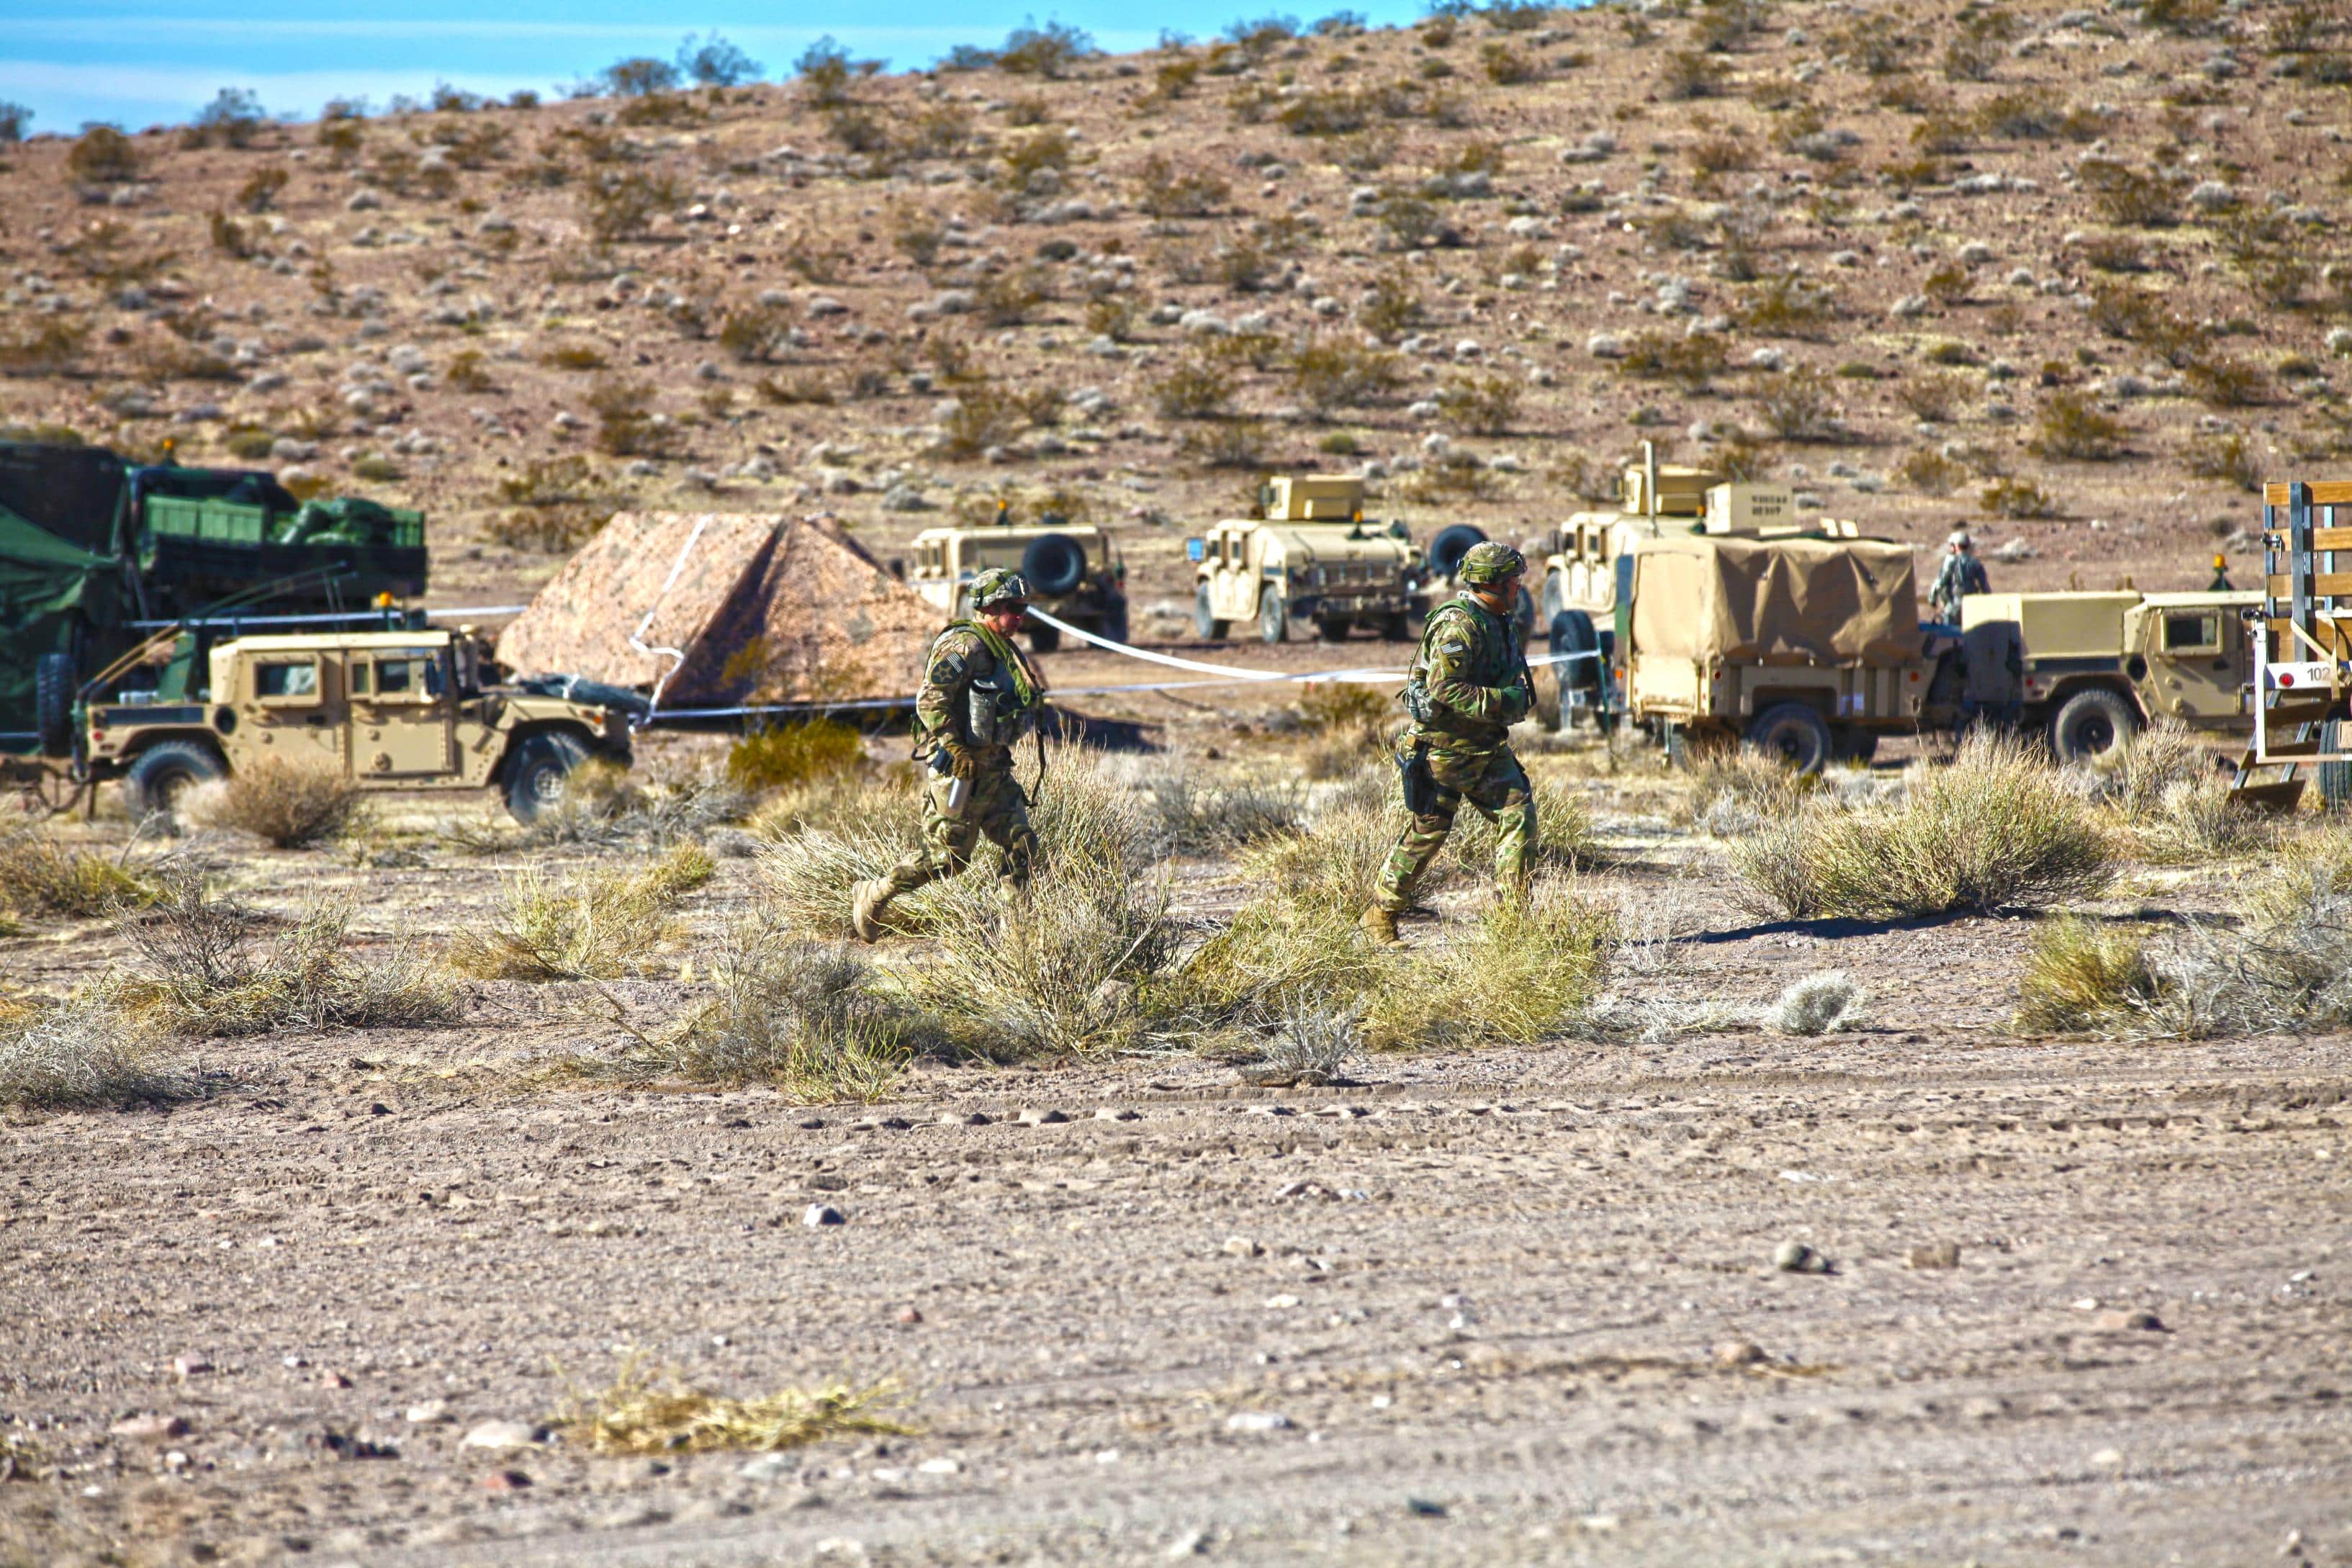 Soldiers of the 1st Stryker Brigade Combat Team, 25th Infantry Division react to simulated indirect fire on the National Training Center, Ft. Irwin, CA., Jan. 15, 2017. The National Training Center conducts tough, realistic, Unified Land Operations with our United Action Partners to prepare Brigade Combat Teams and other units for combat while taking care of Soldiers, Civilians, and Family members. (U.S. Army Sgt. Michael Spandau/Released)